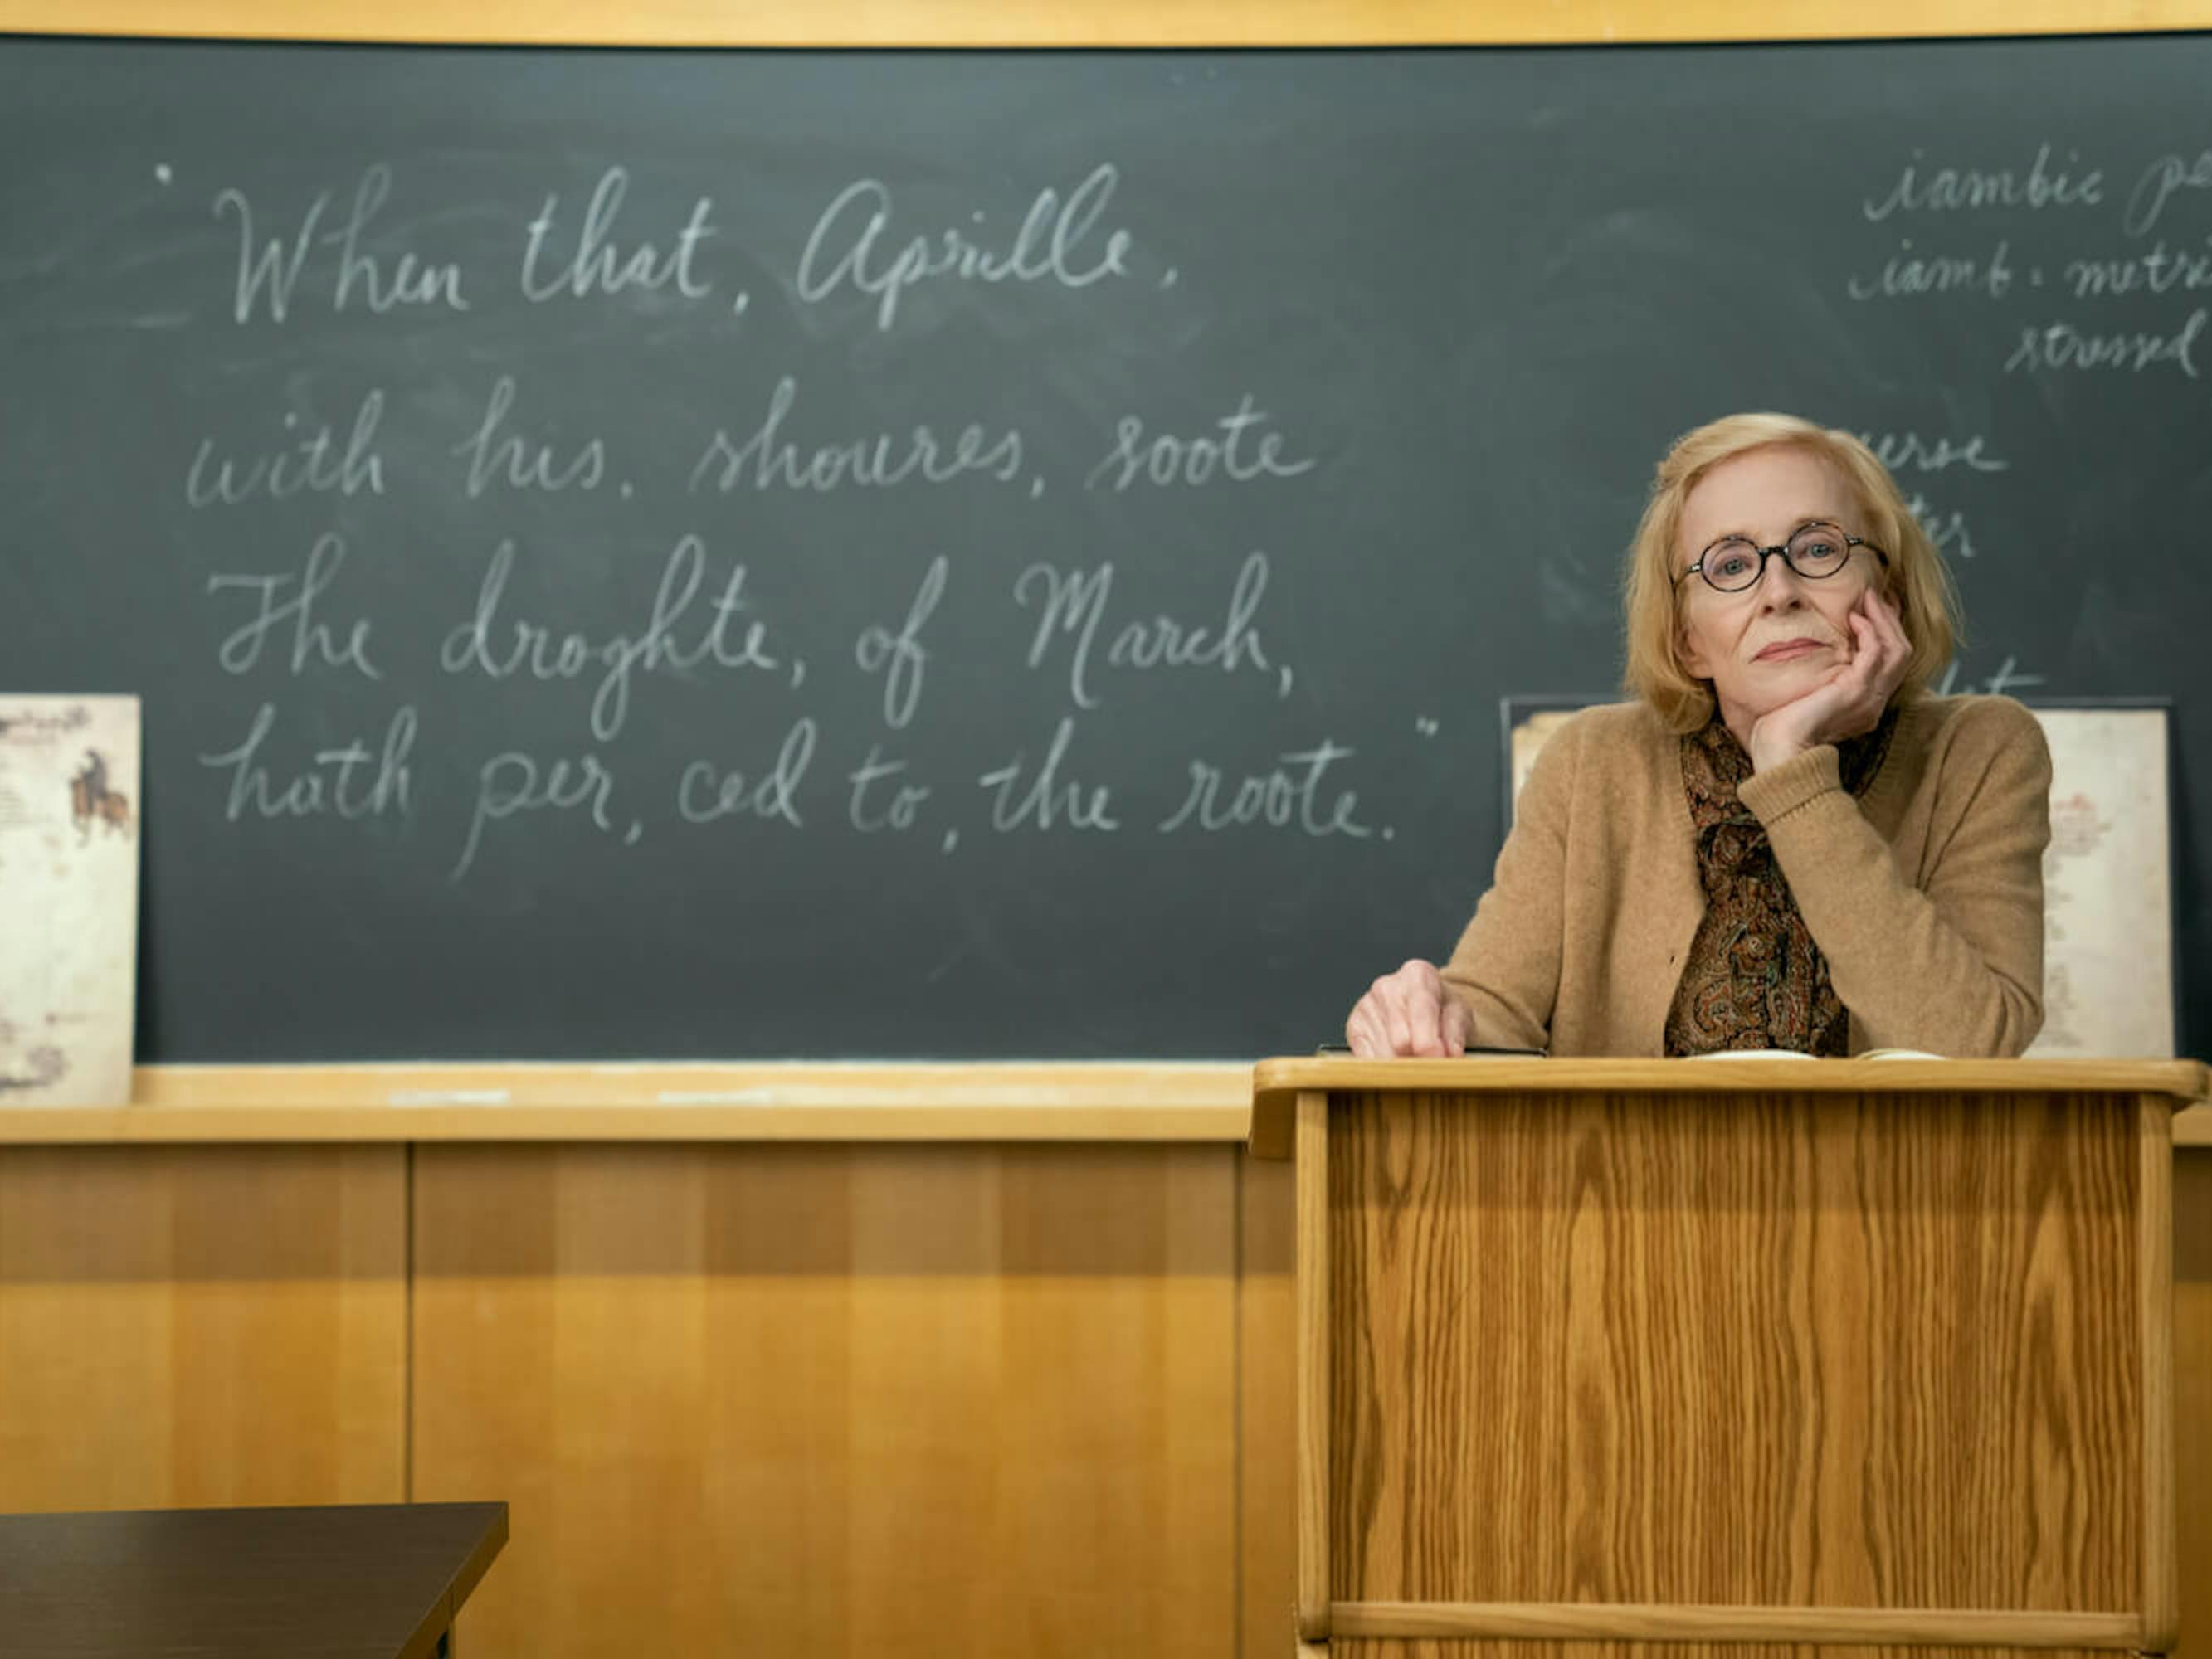 Professor Joan Hambling rests her chin on her hand looking bored. She stands behind a wood podium. In the background is a chalkboard with quotes written in white chalk.